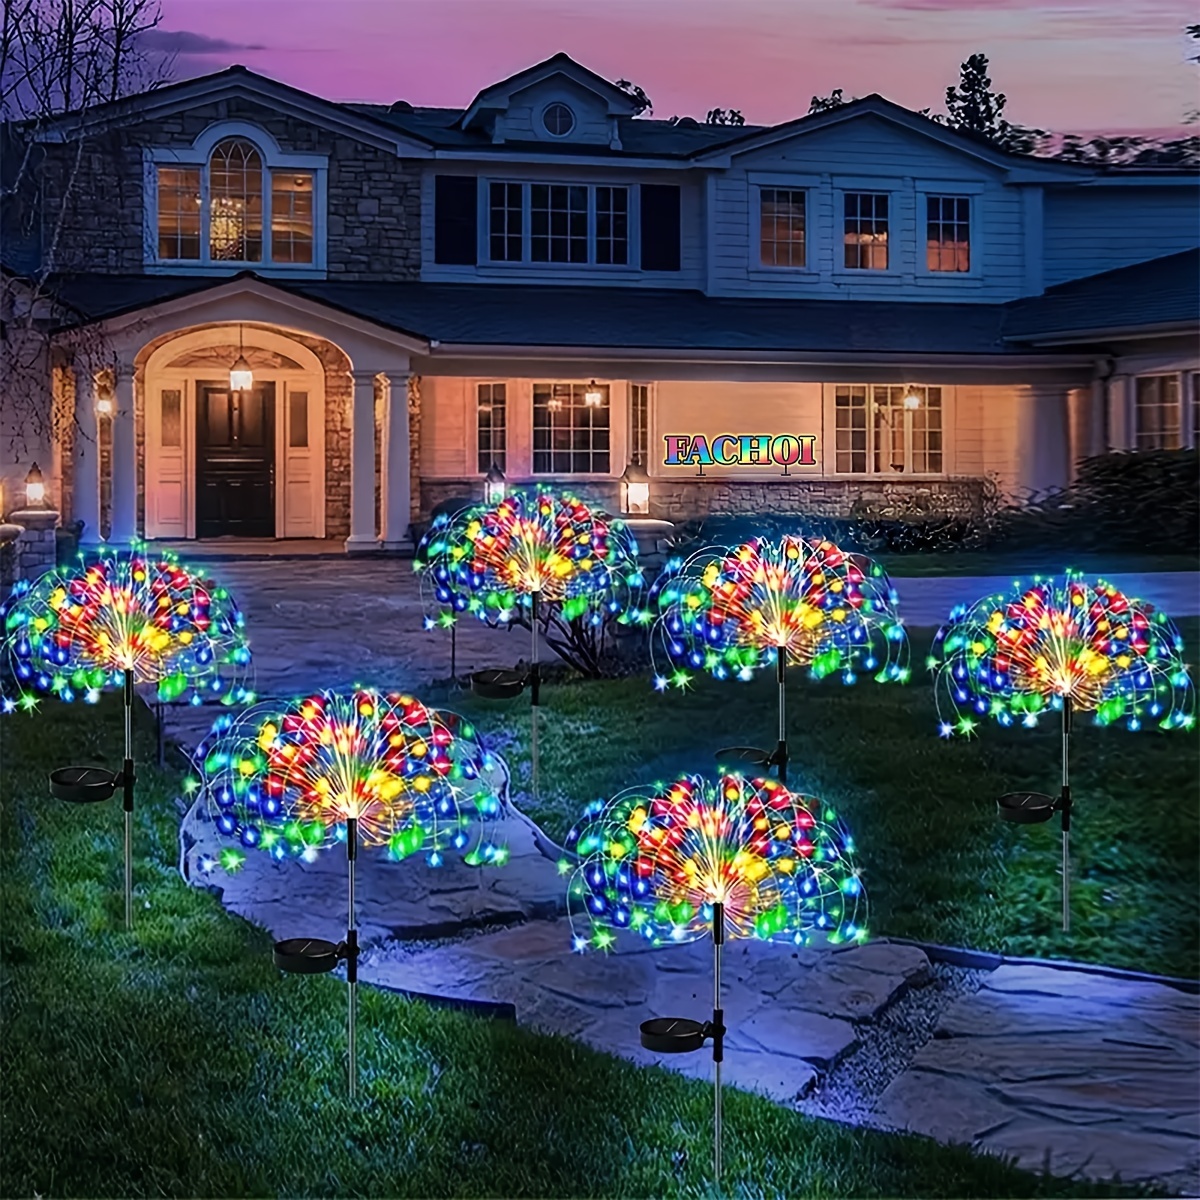 

300led Solar Garden Firework Lights Outdoor Waterproof 200led/60led Sparklers Solar Lights 60led For Outside Patio Backyard Yard Pathway Walkway Decorations (colorful/warm White)